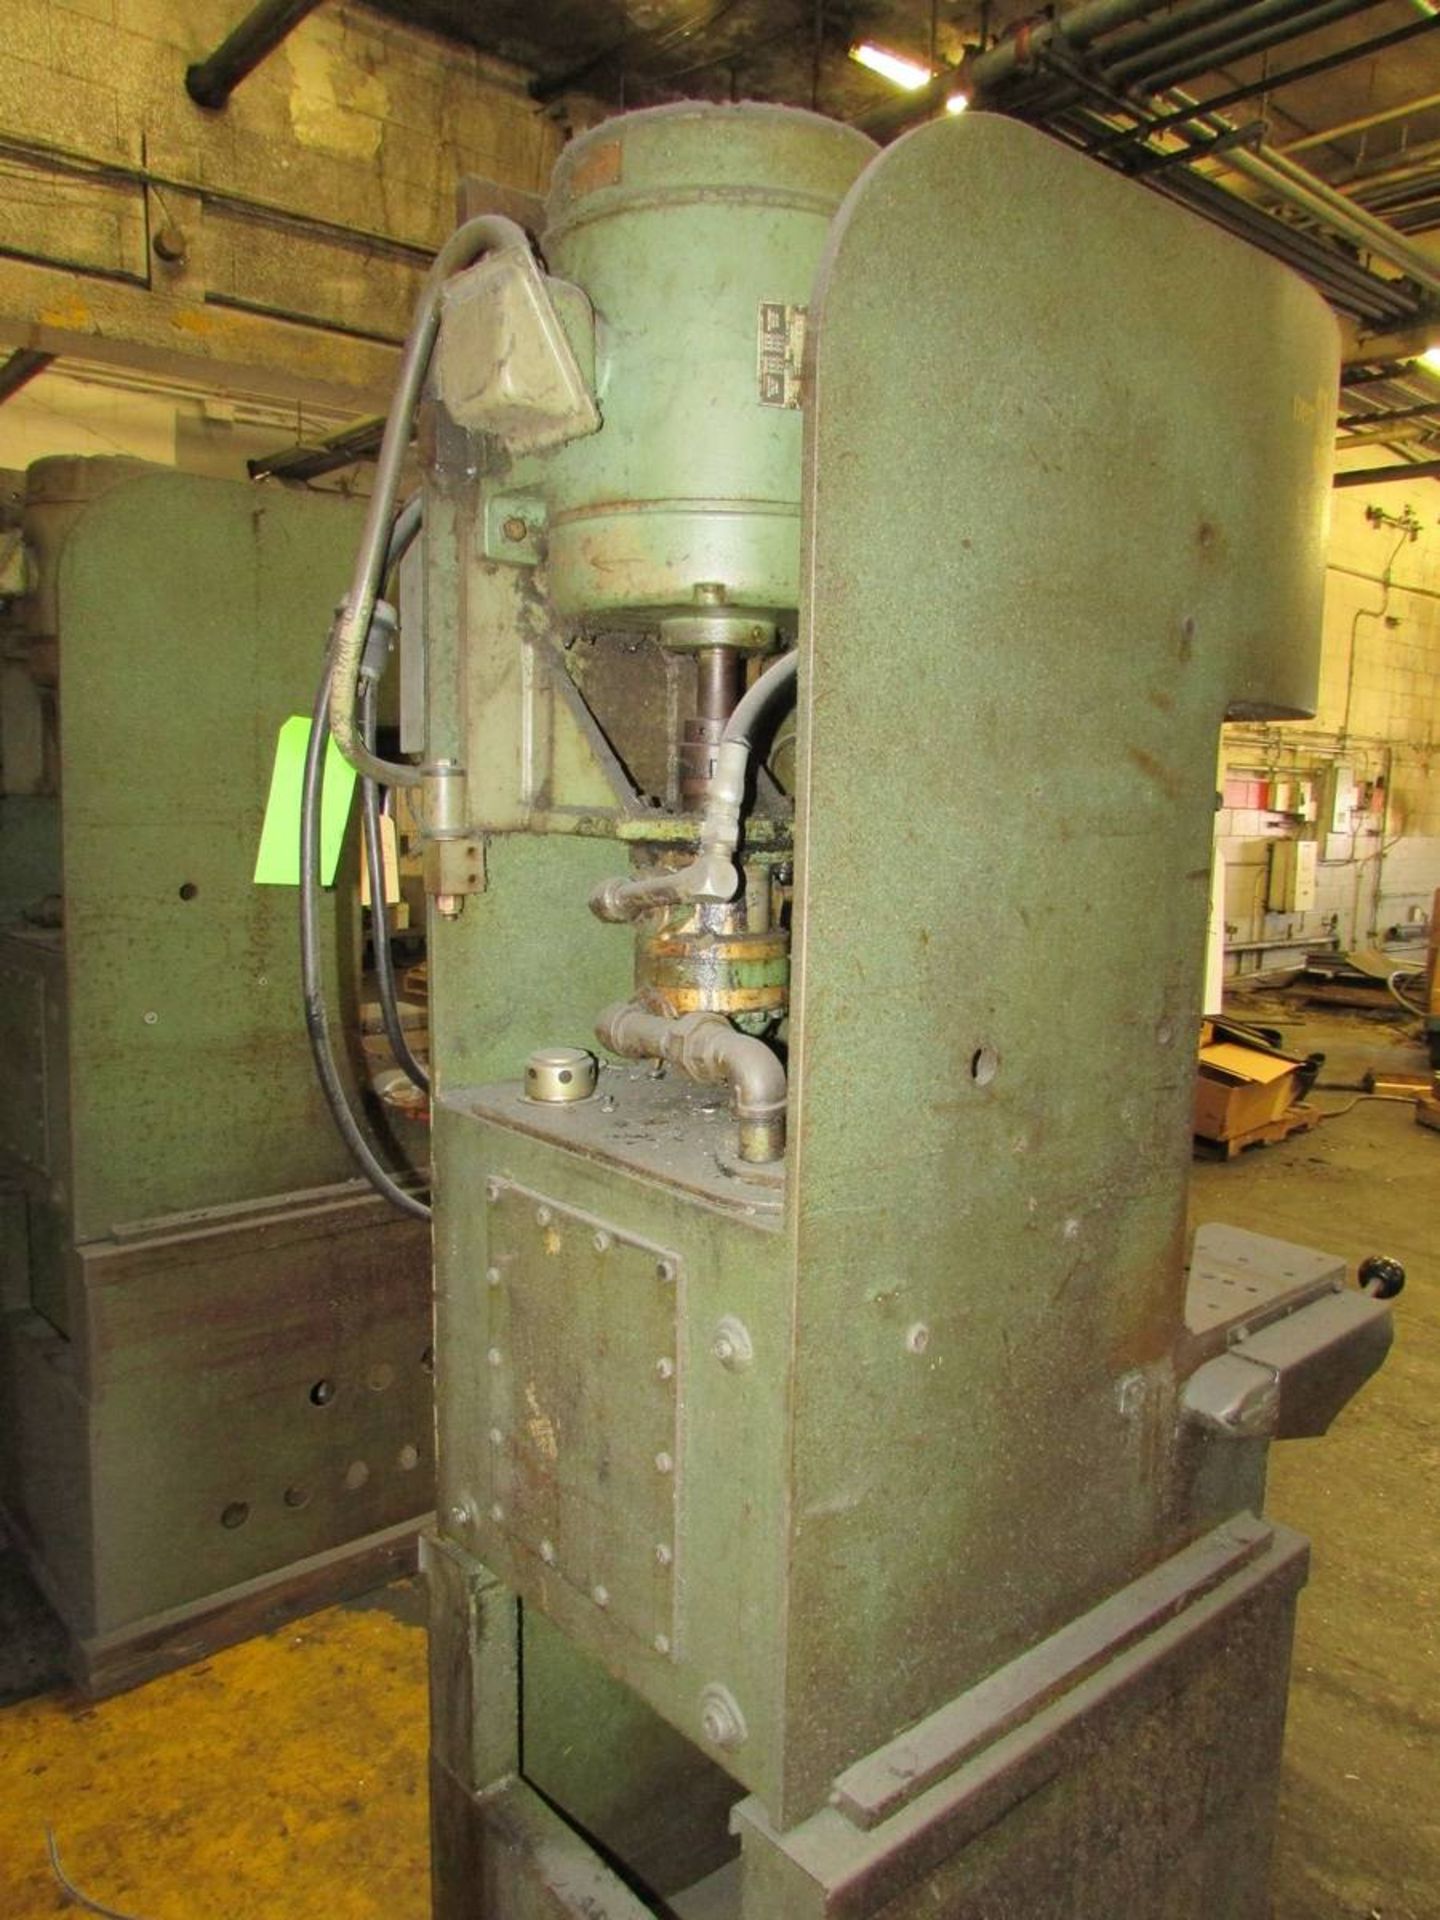 1966 Denison Multipress S087LC261D267C221A59S206 8 Ton Hydraulic C-Frame Press - Image 5 of 8